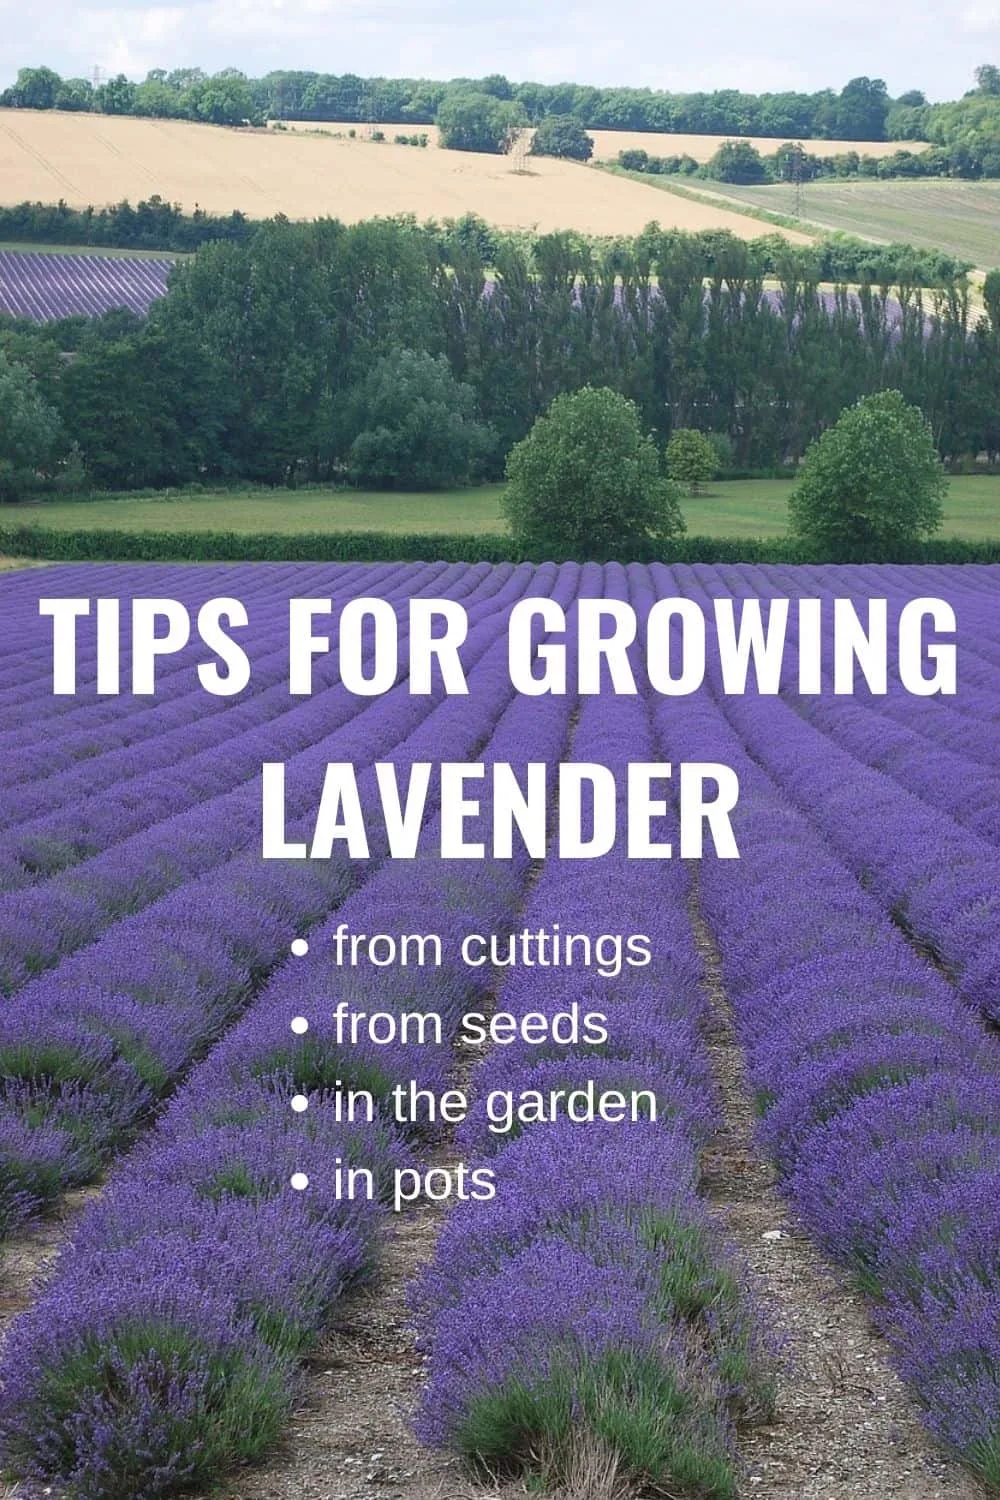 tips for growing lavender: from cuttings, from seeds, in the garden, and in pots